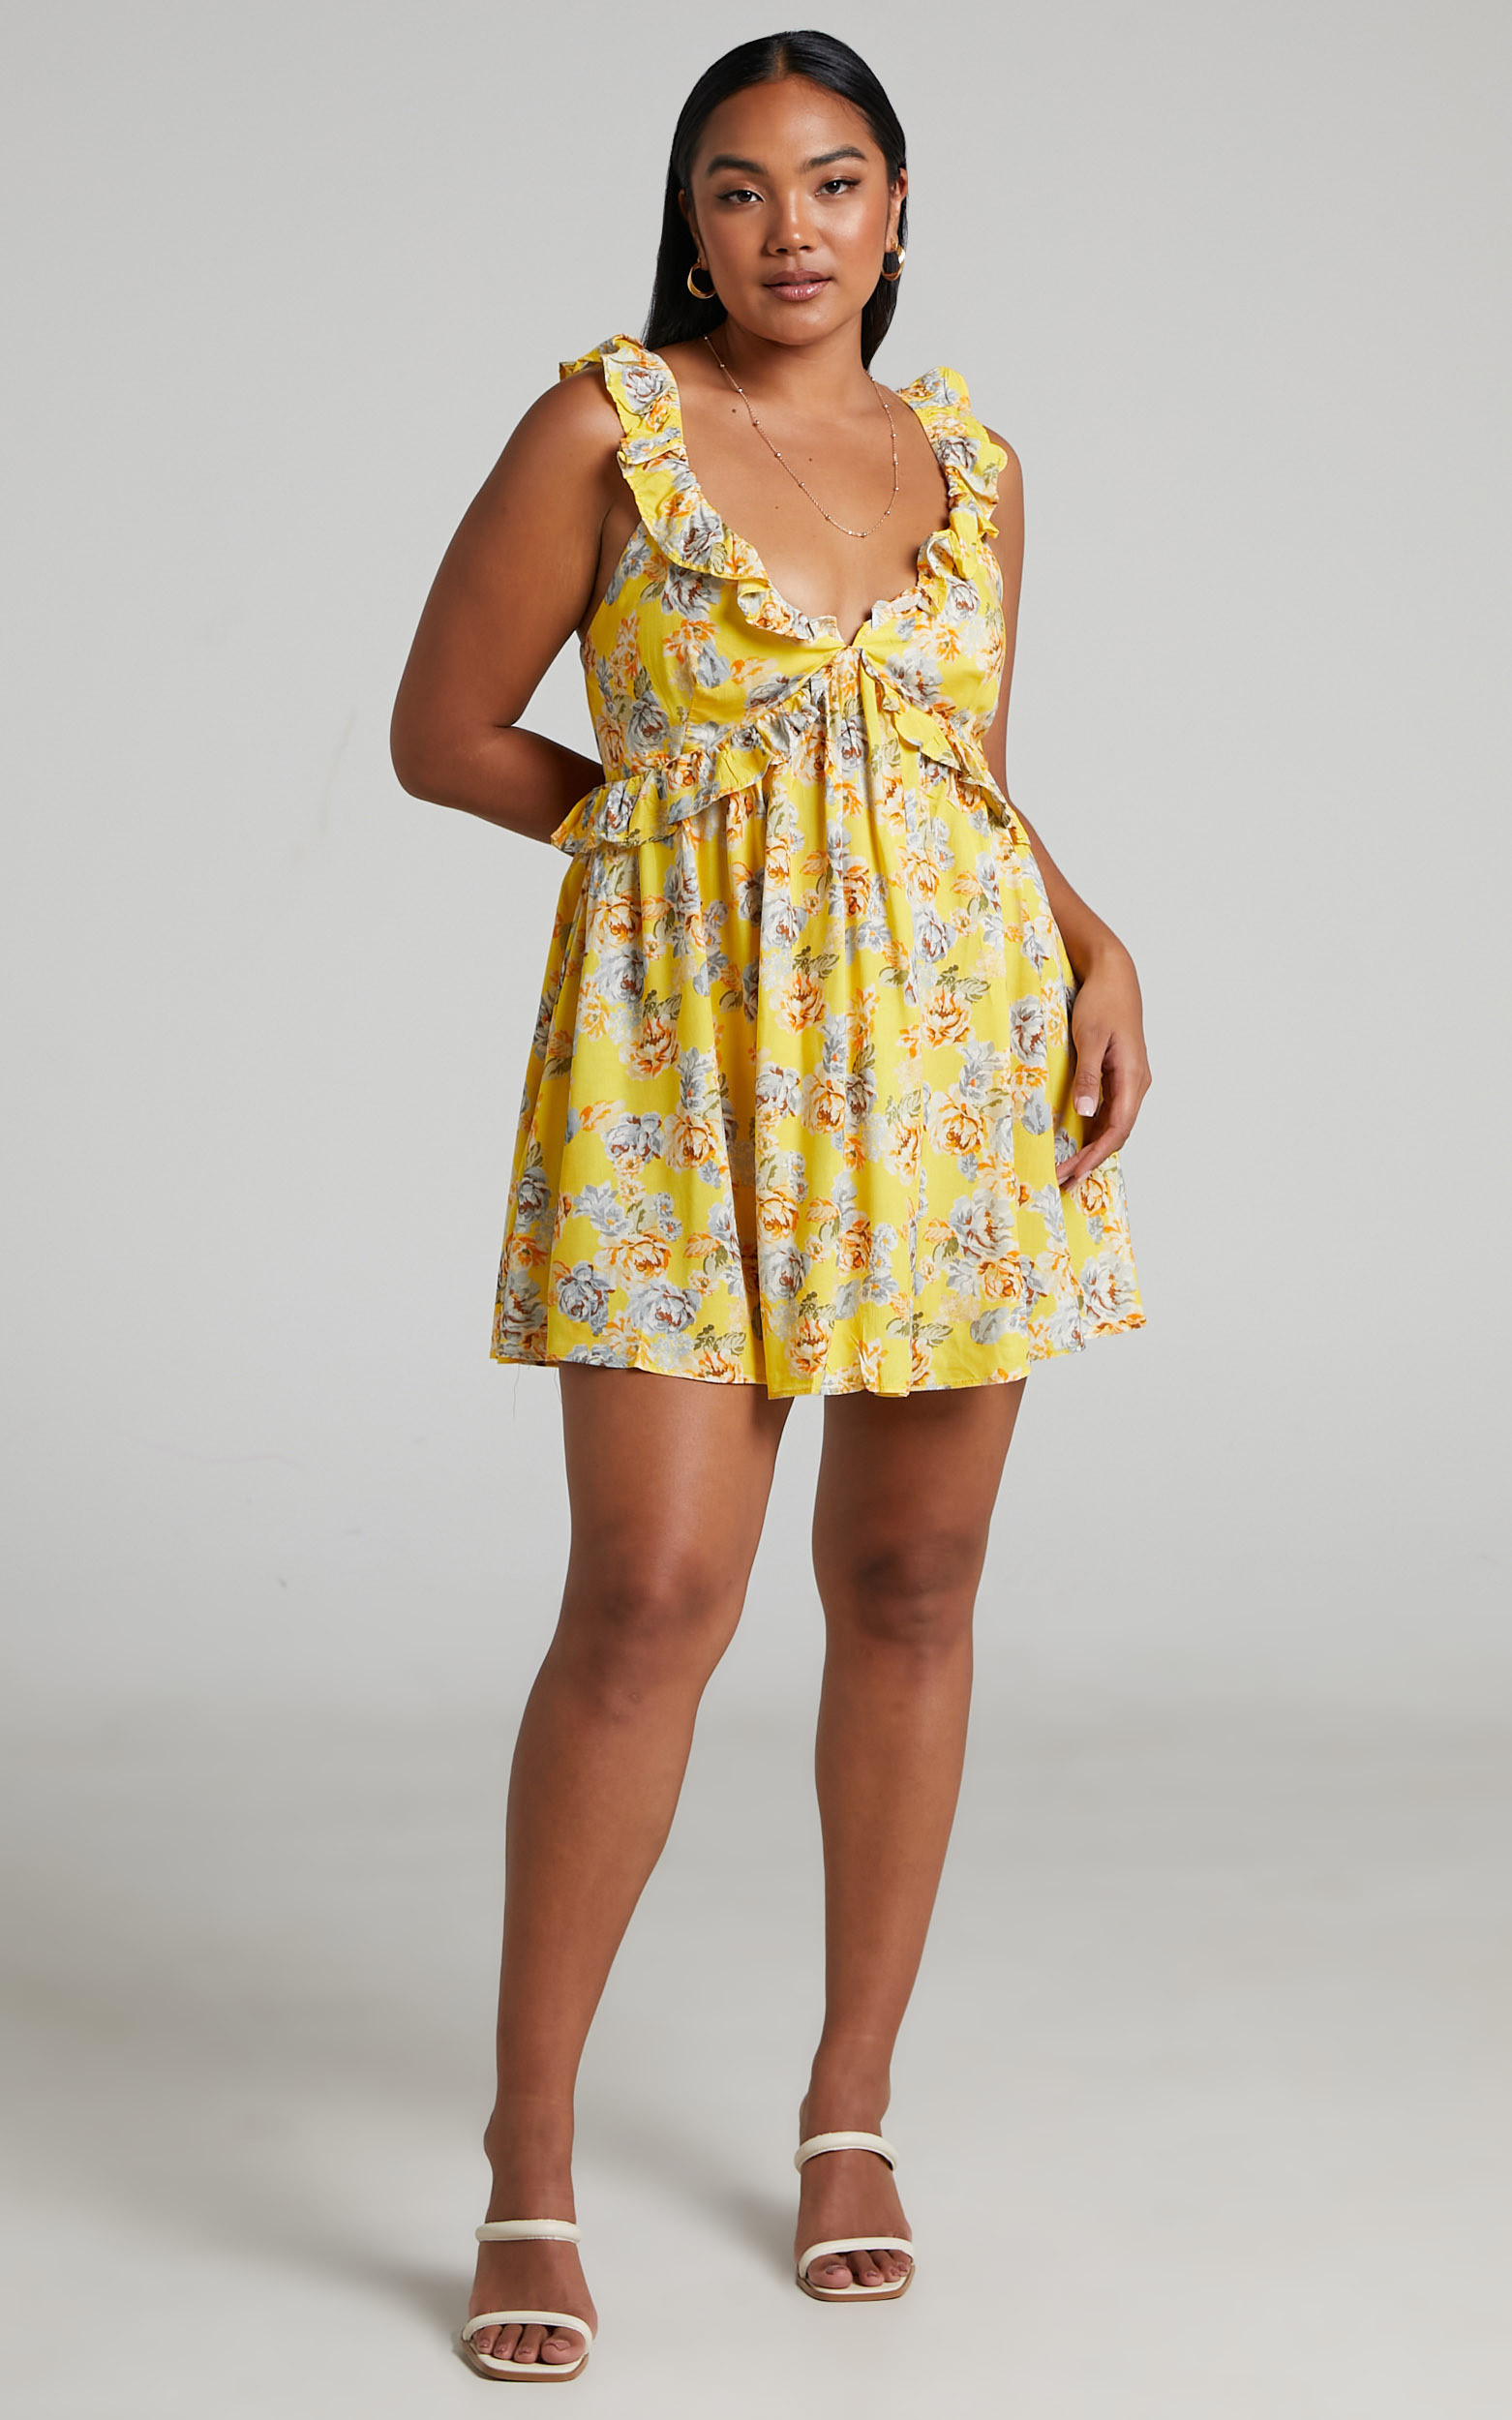 Serenyo Ruffle Detail V Neck Low Back Skater Mini Dress in Yellow Floral - 10, YEL1, hi-res image number null